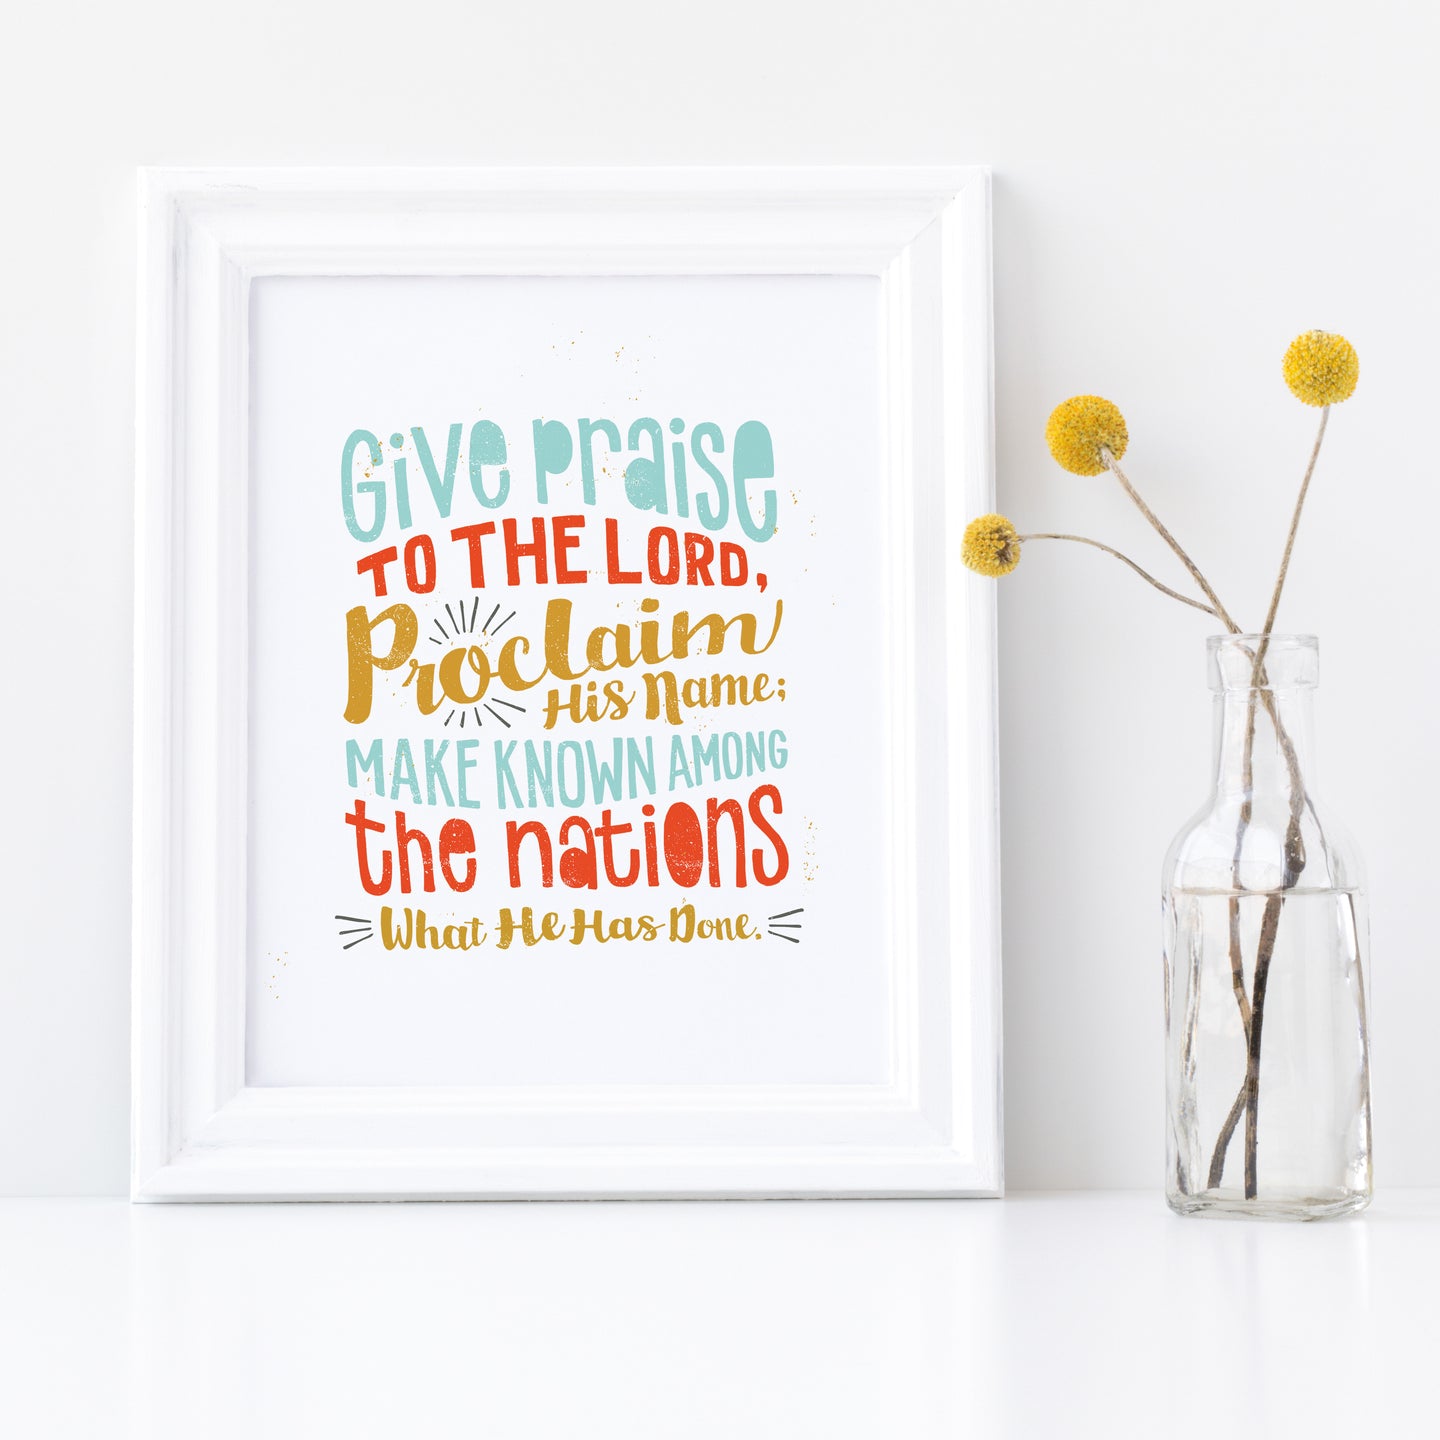 Artwork in a white frame with the artwork printed on white paper and colorful hand drawn lettering with the Psalm 105:1 